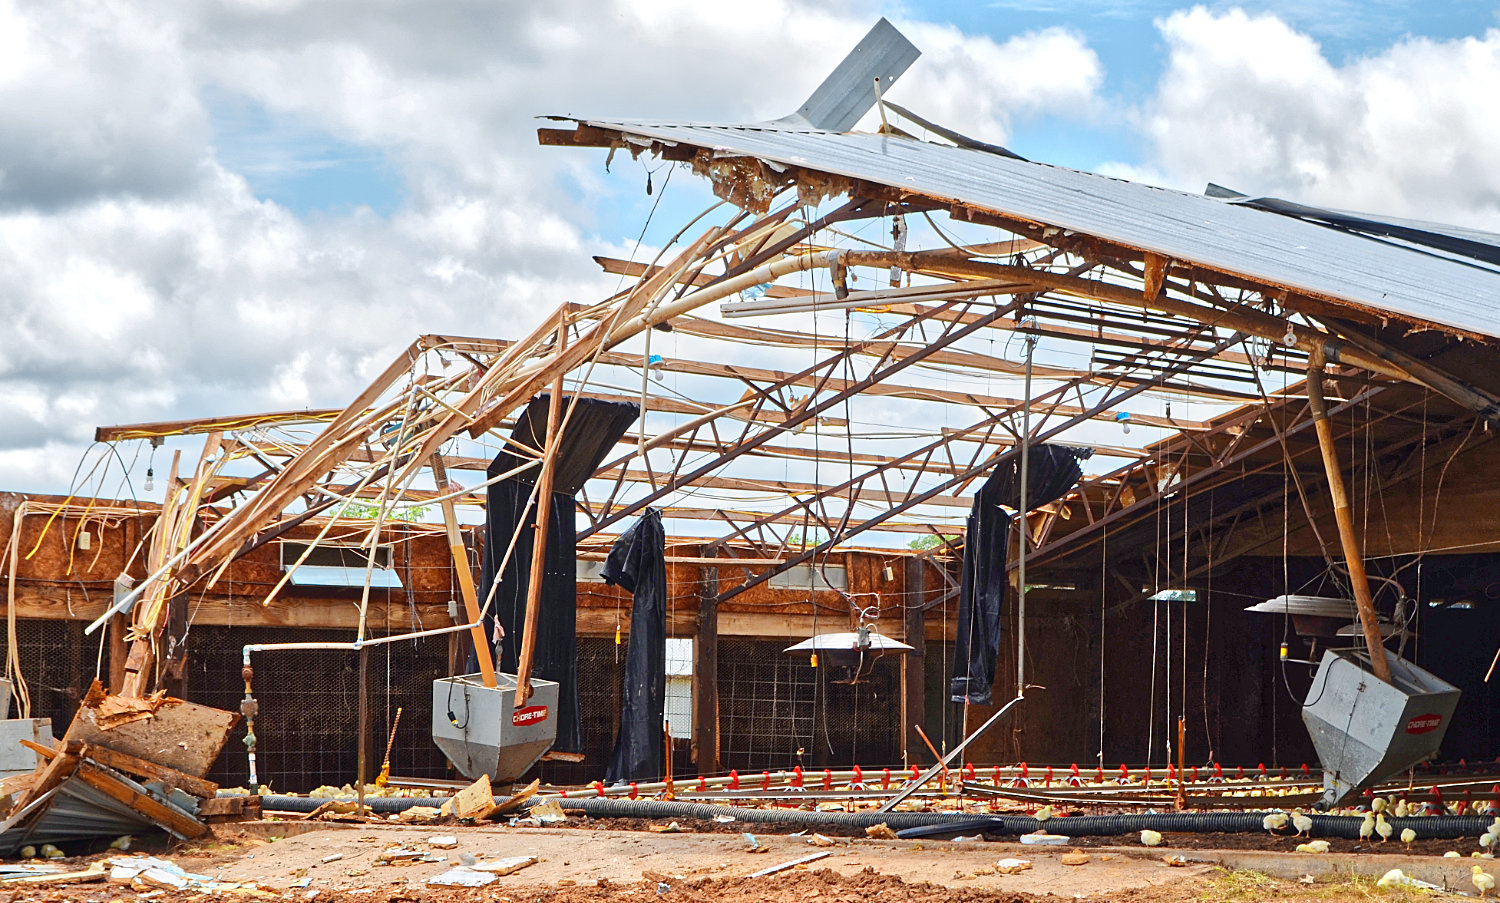 A chicken house was among the structures damaged by a tornado east of Winnsboro on the afternoon of Wednesday, May 29.